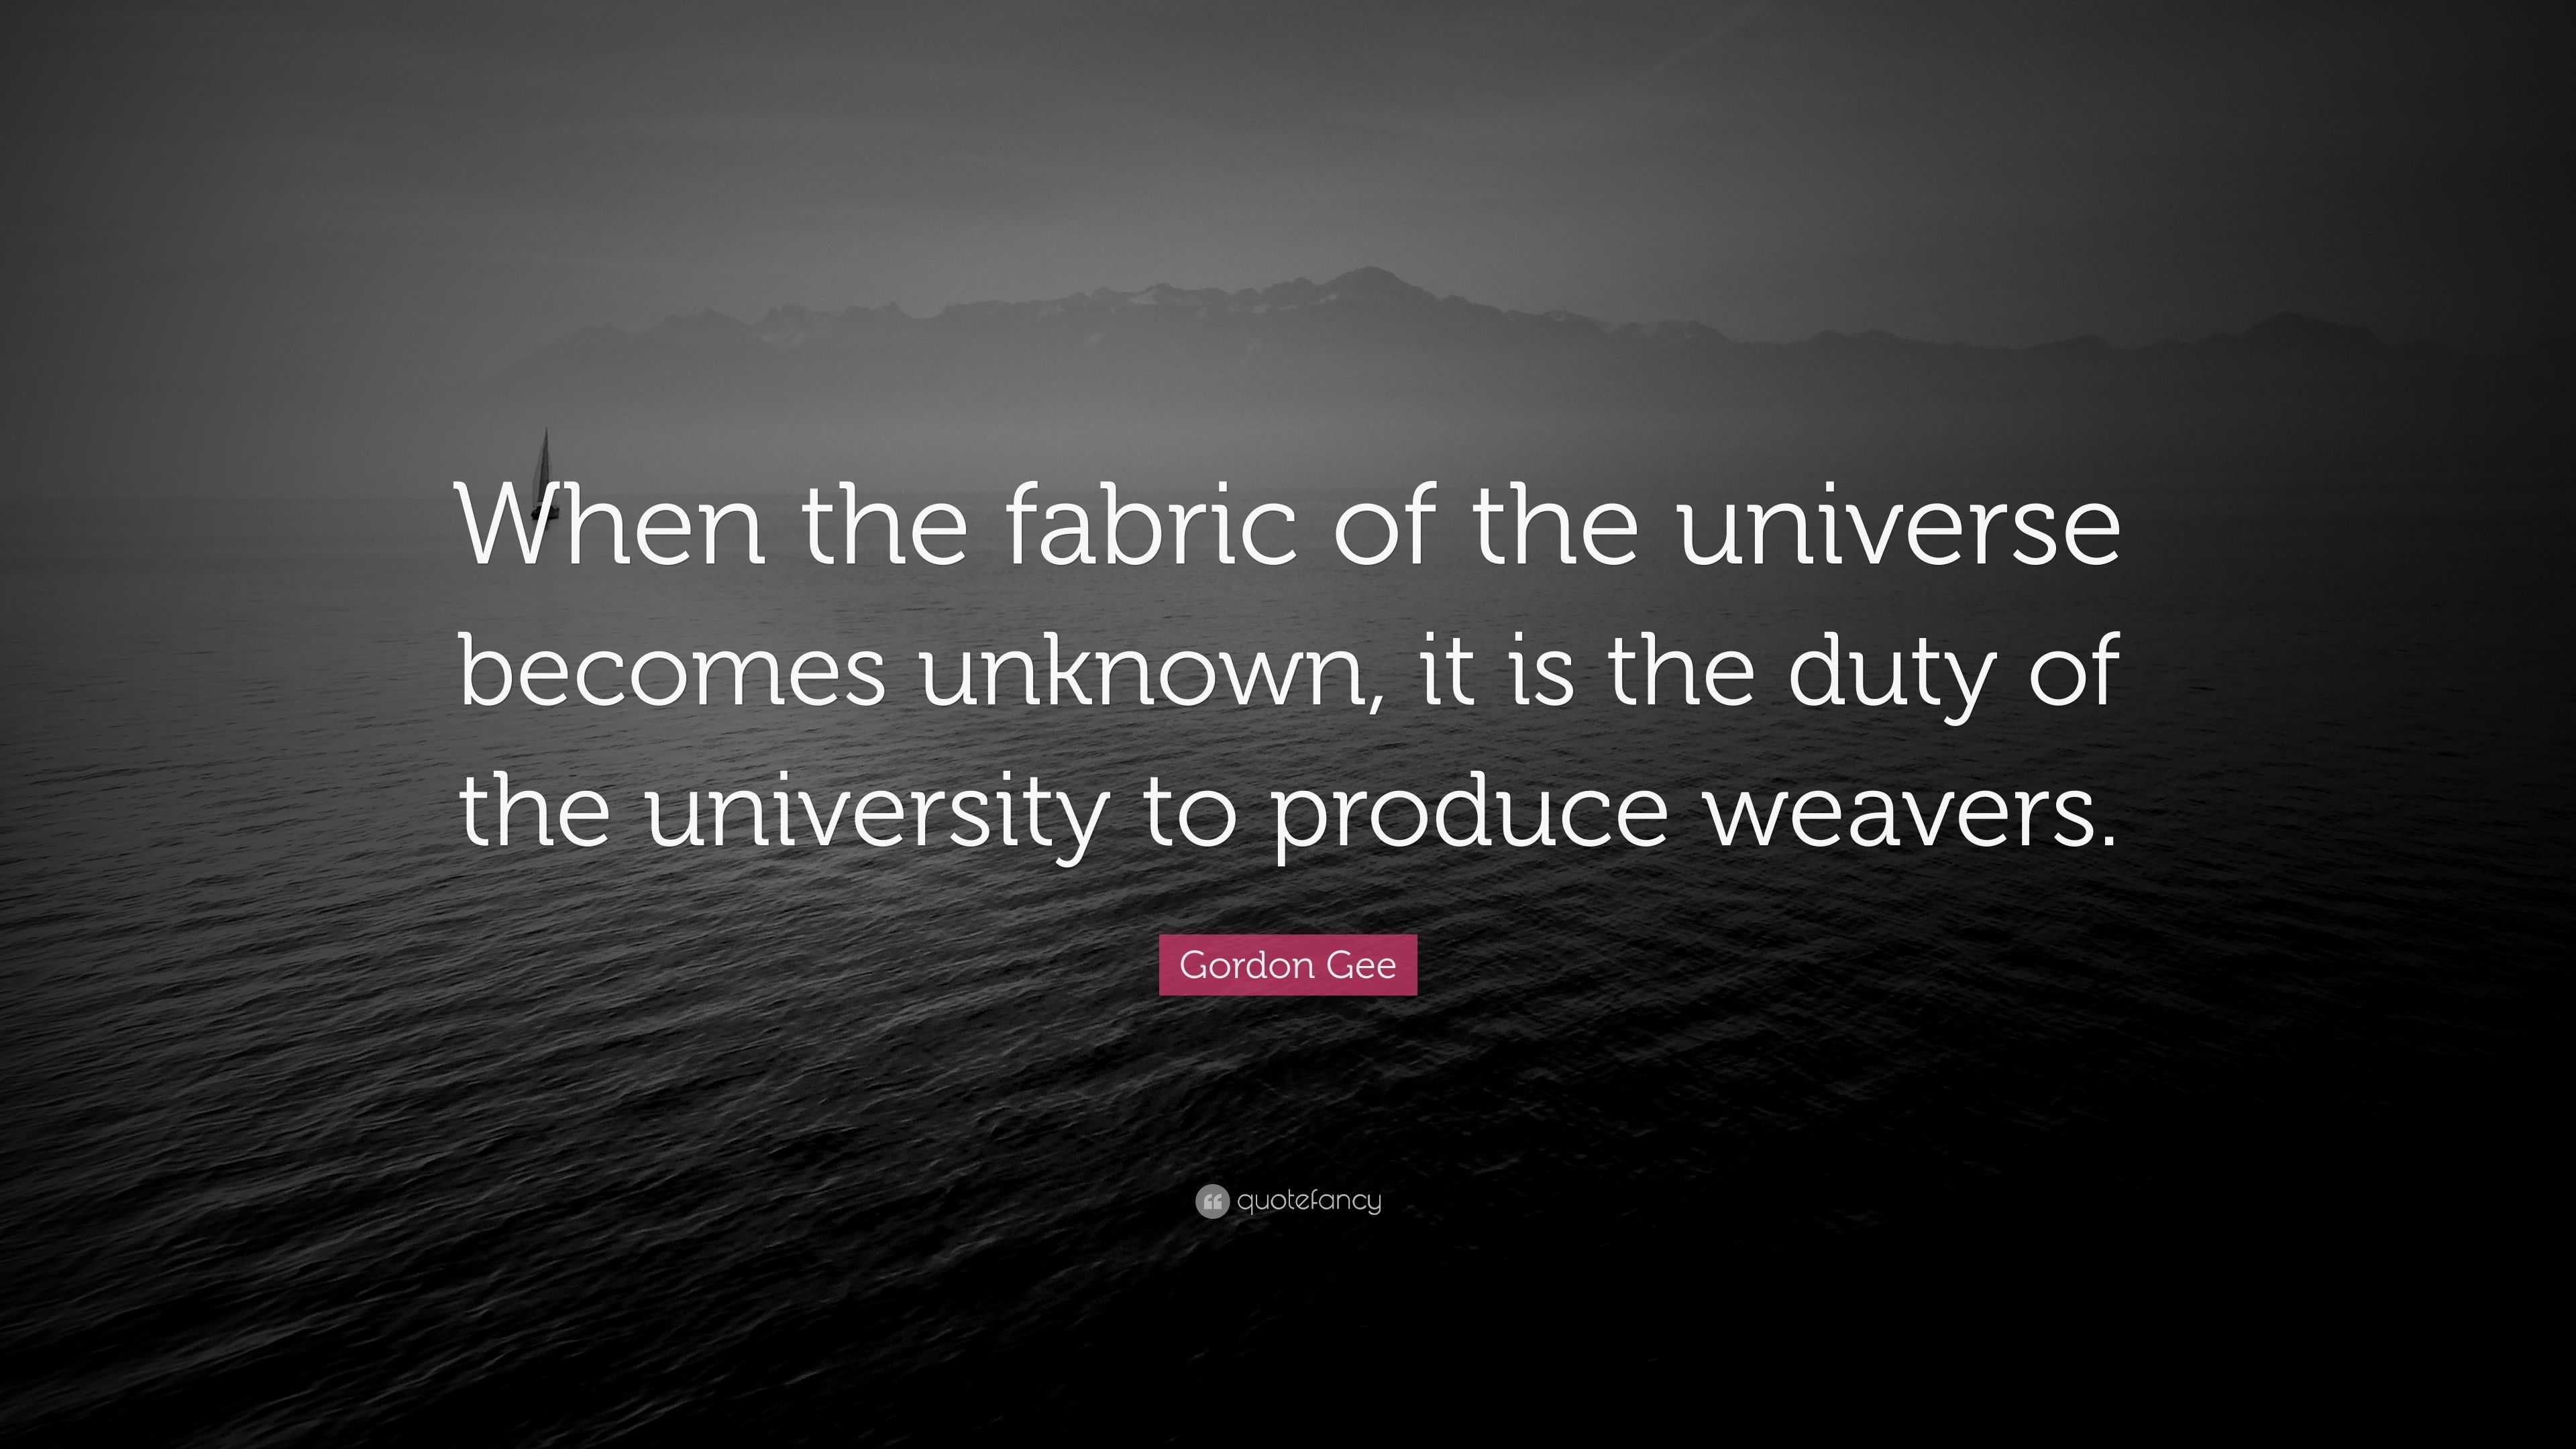 Gordon Gee Quote: “When the fabric of the universe becomes unknown, it is  the duty of